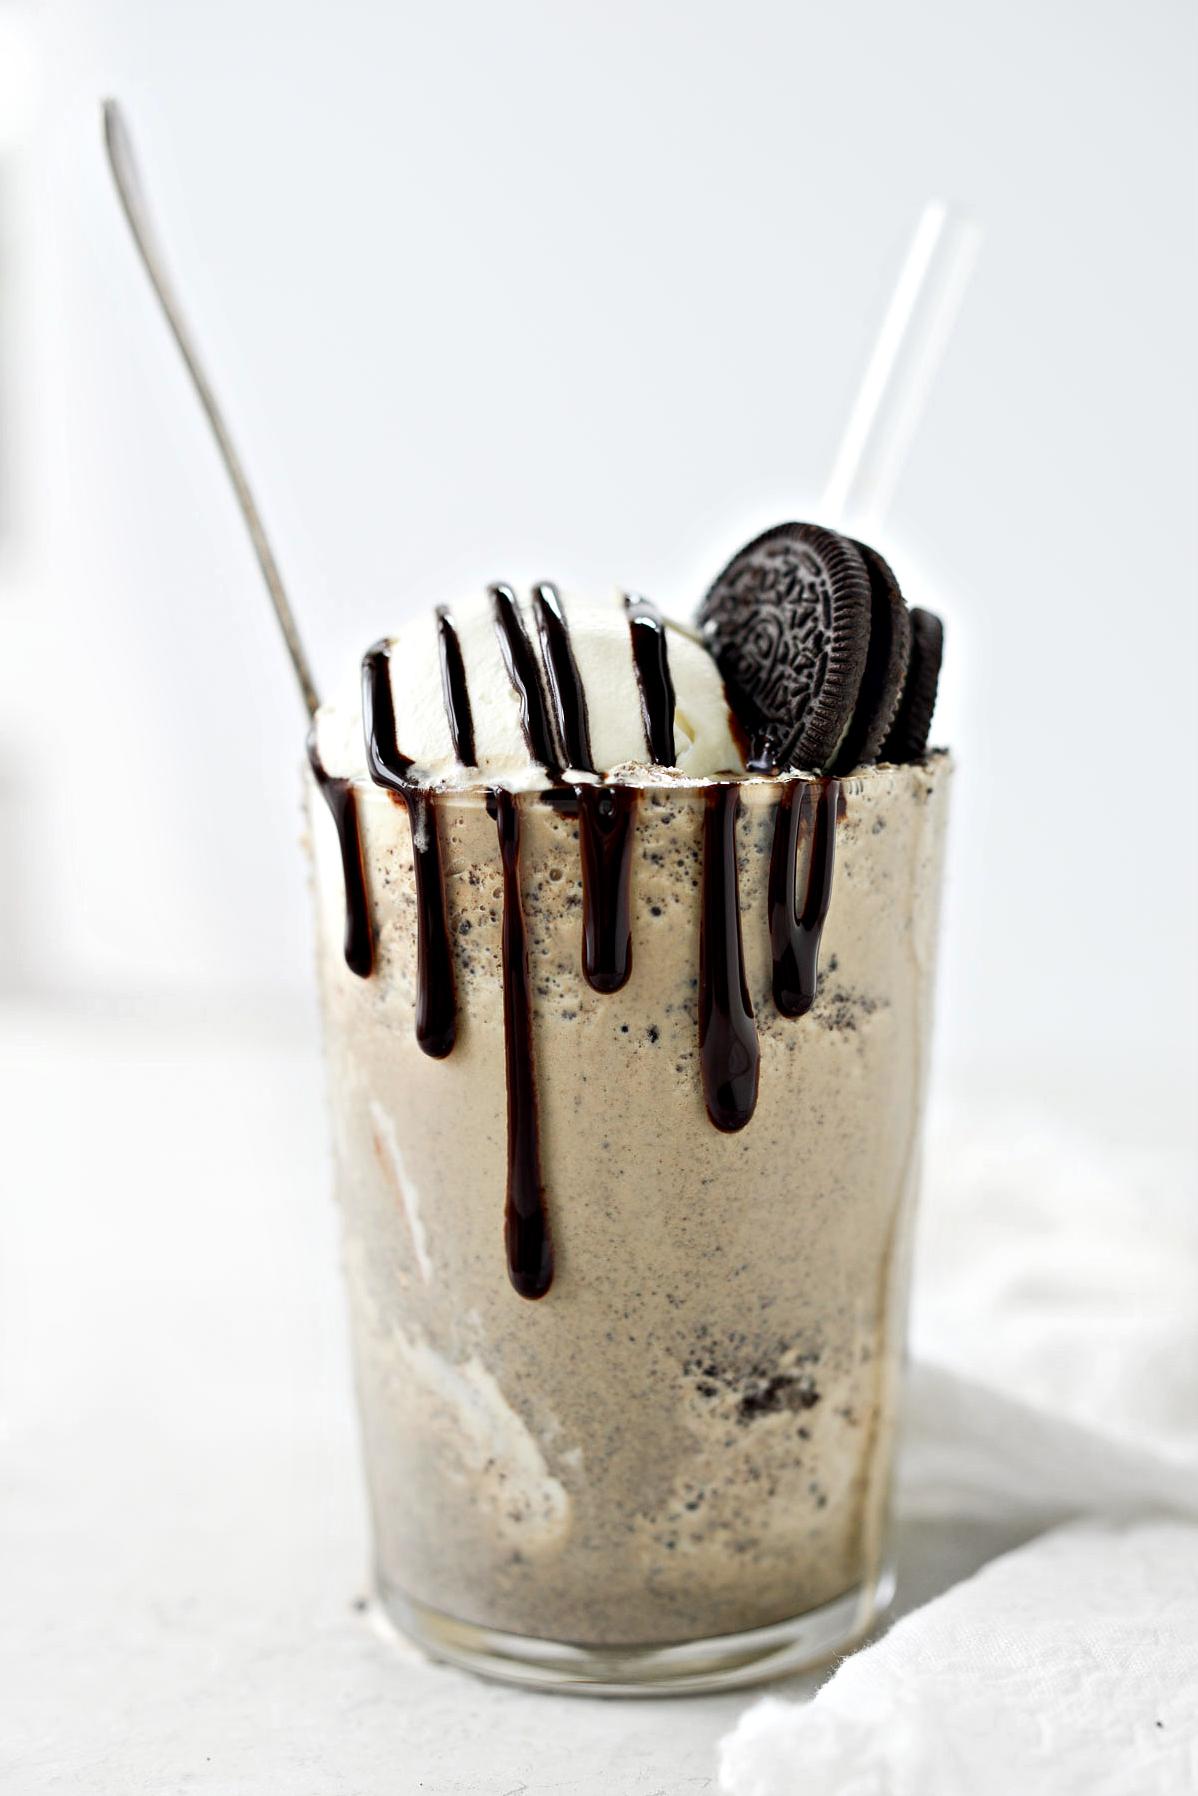  For an afternoon treat or dessert, try this easy creamy espresso milkshake!